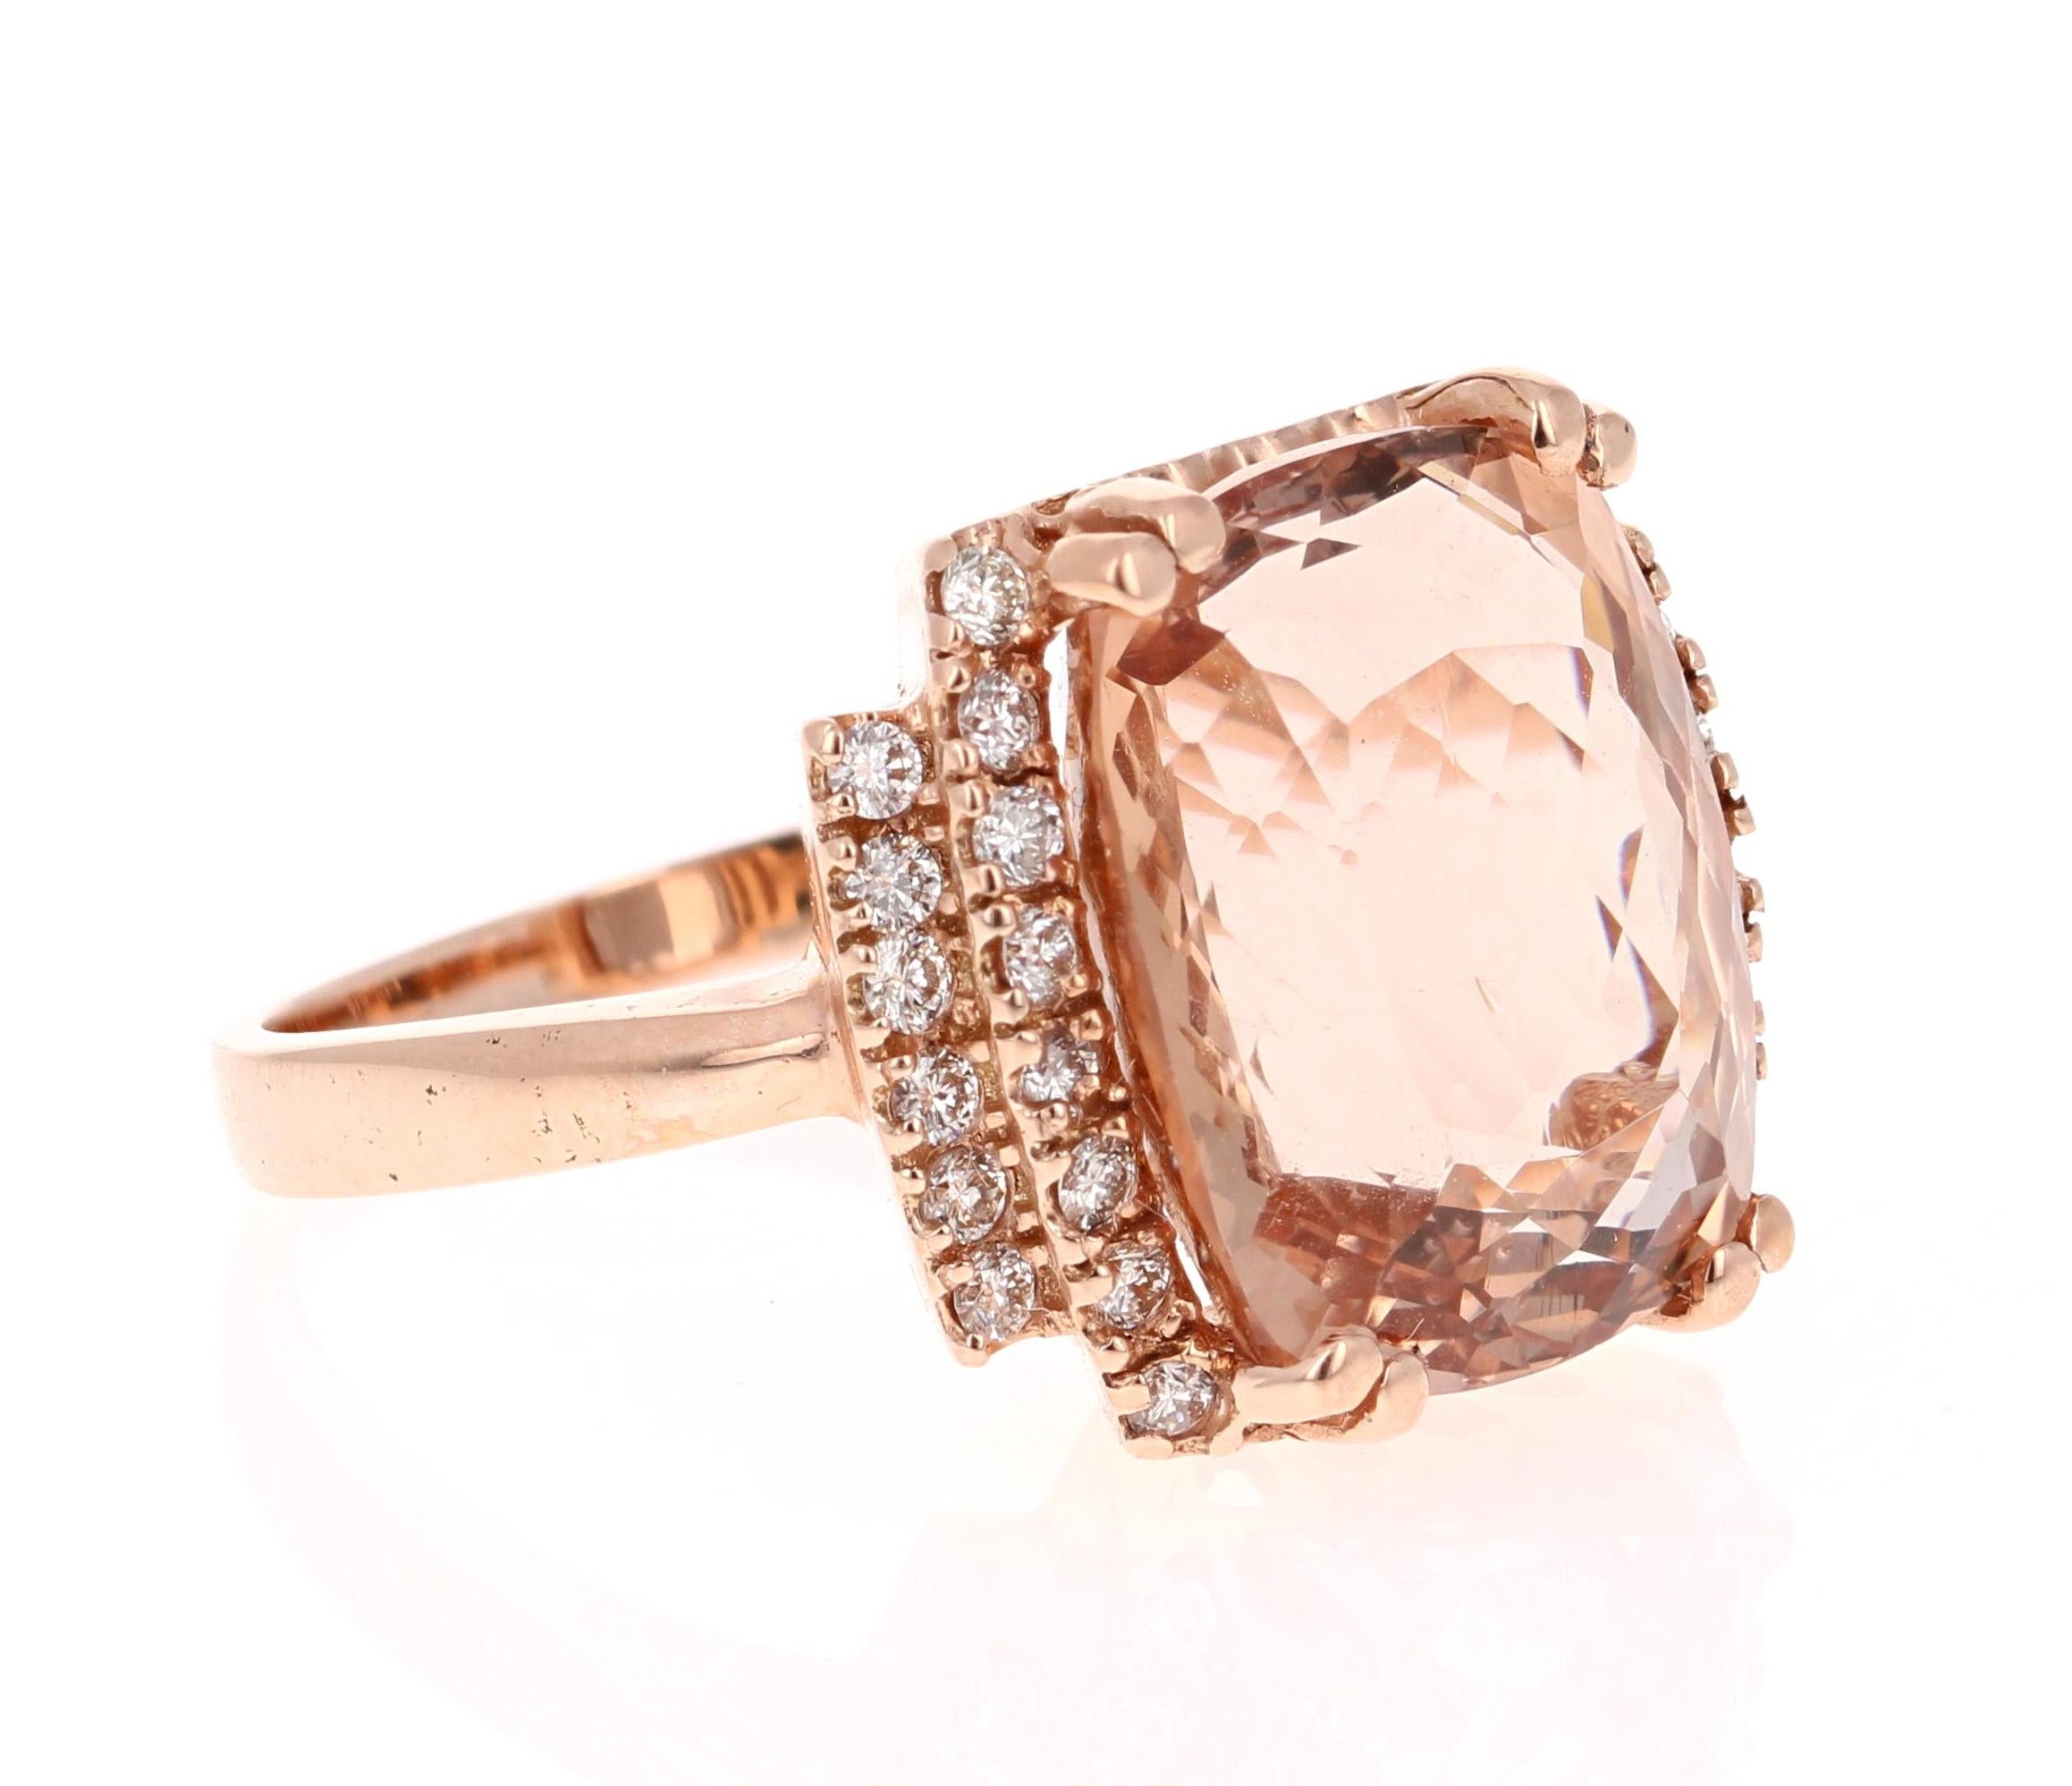 Stunning Statement Morganite & Diamond Ring! 

This Morganite ring has a 10.71 Carat Oval-Cushion Cut Morganite and is surrounded by 28 Round Cut Diamonds that weigh 0.43 Carats. Clarity: VS, Color: H. The total carat weight of the ring is 11.14